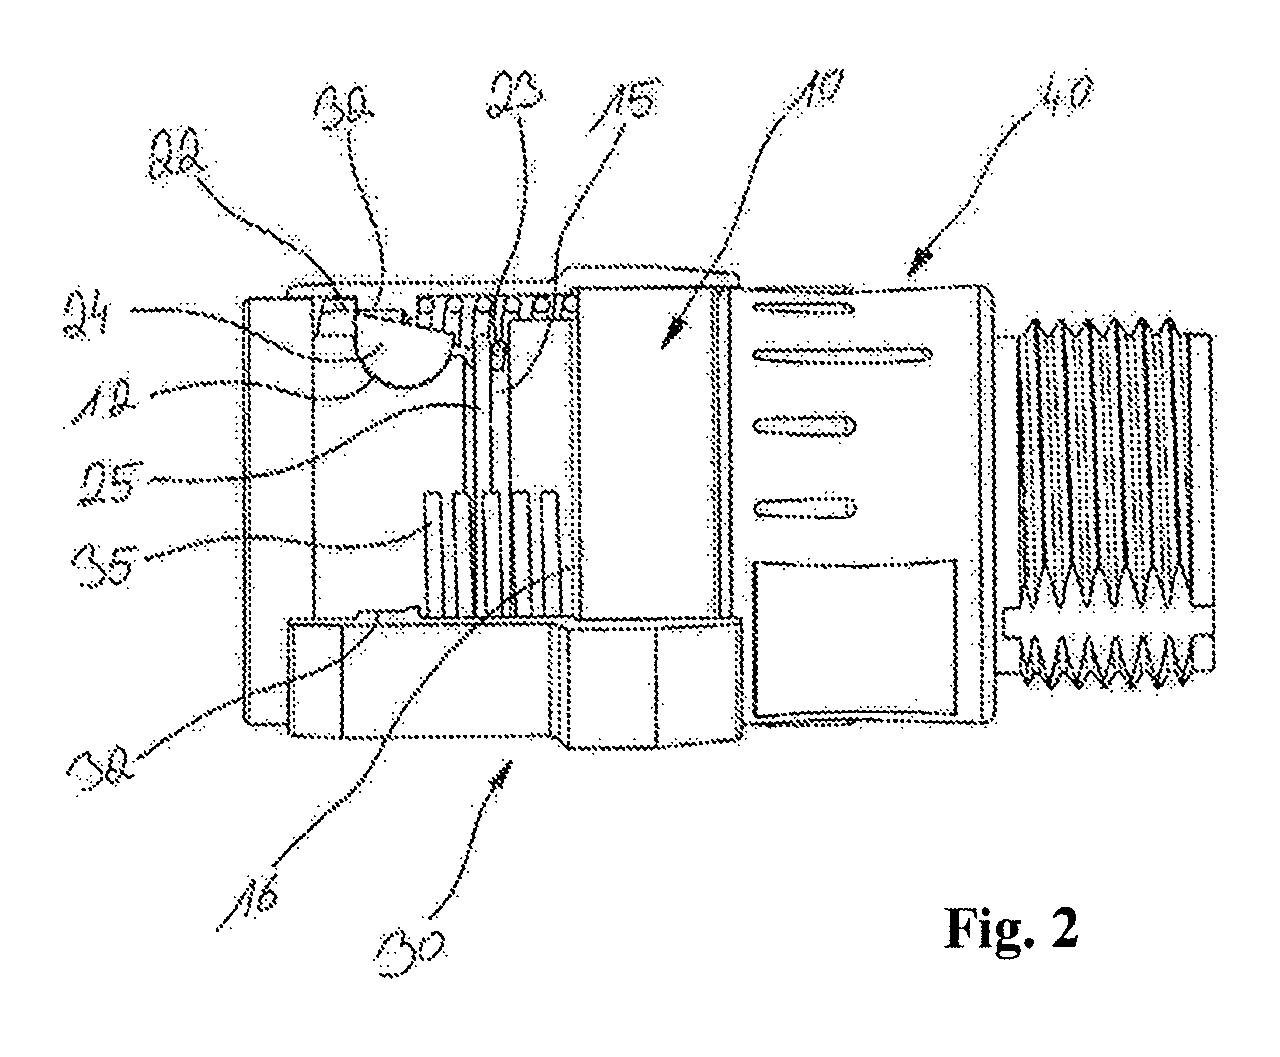 Locking mechanism for plug-in connectors